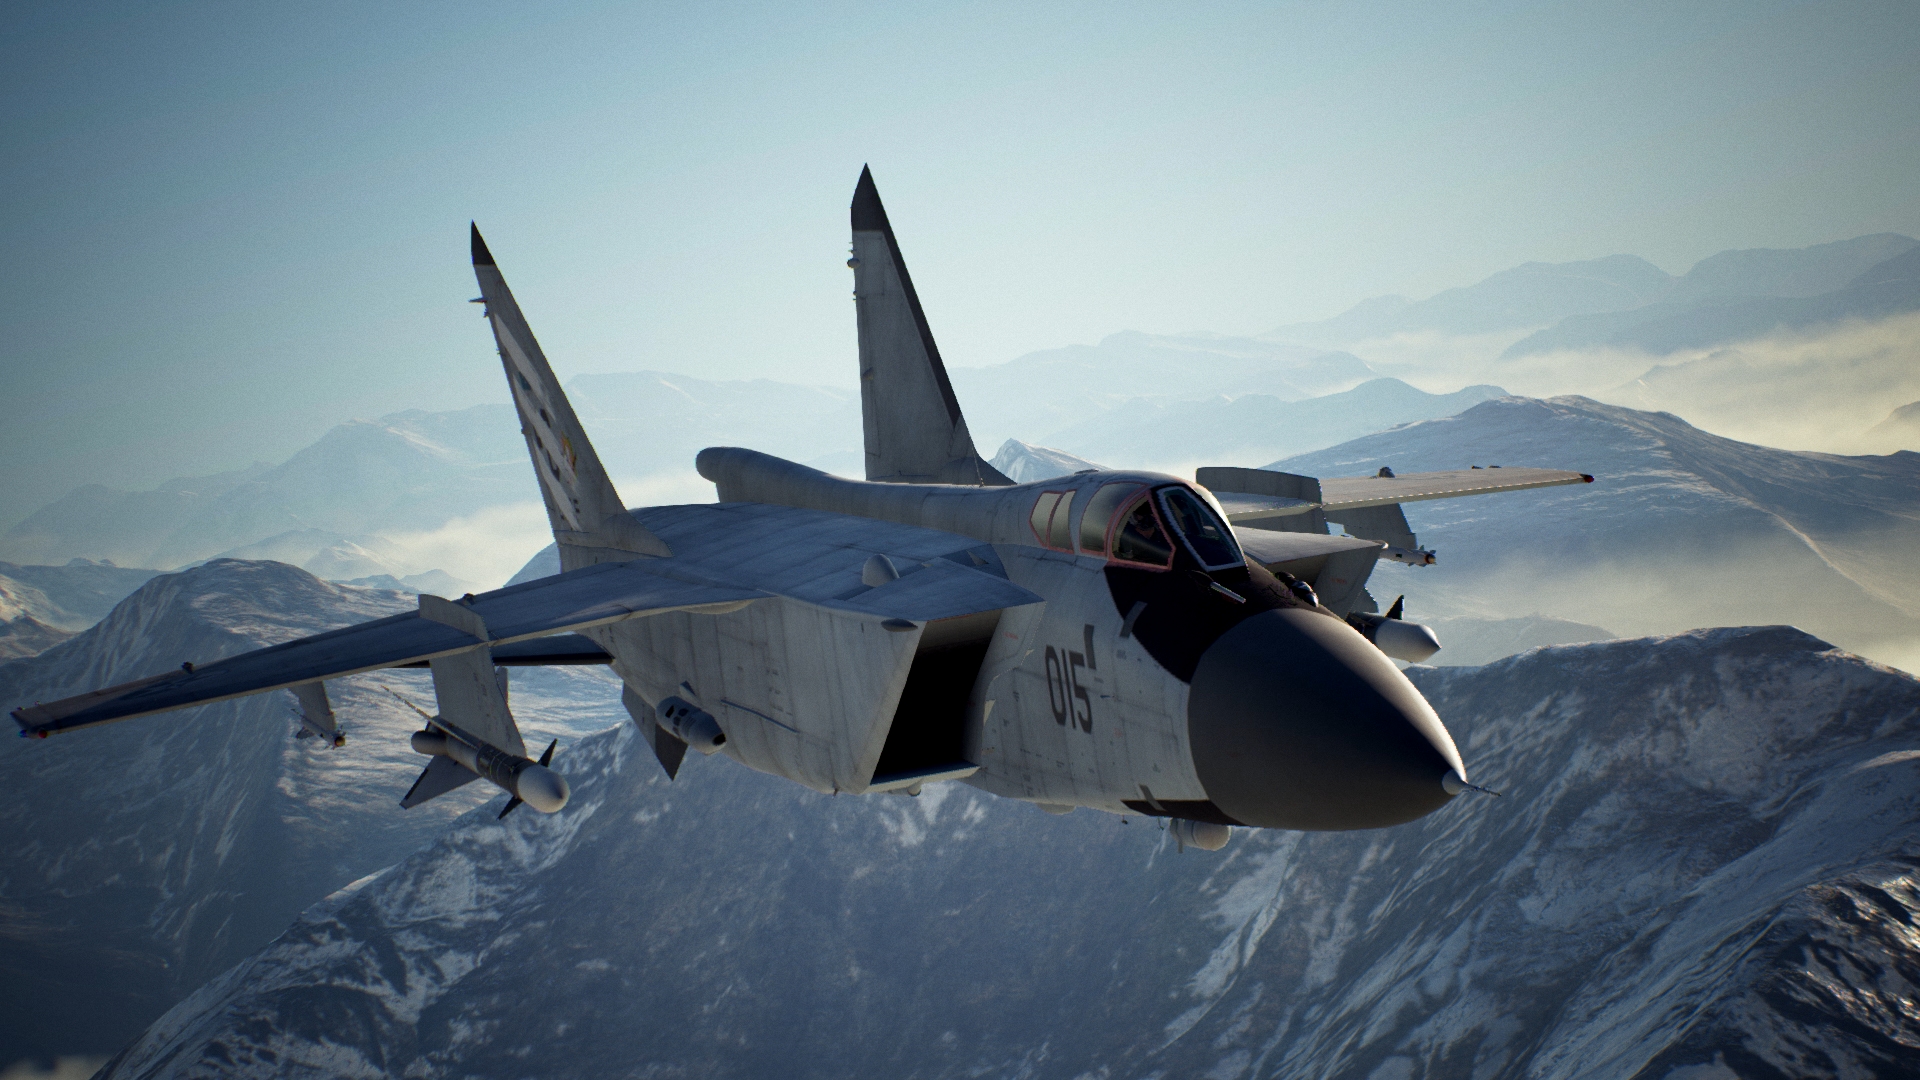 Blue on Blue - Acepedia - The Ace Combat Wiki